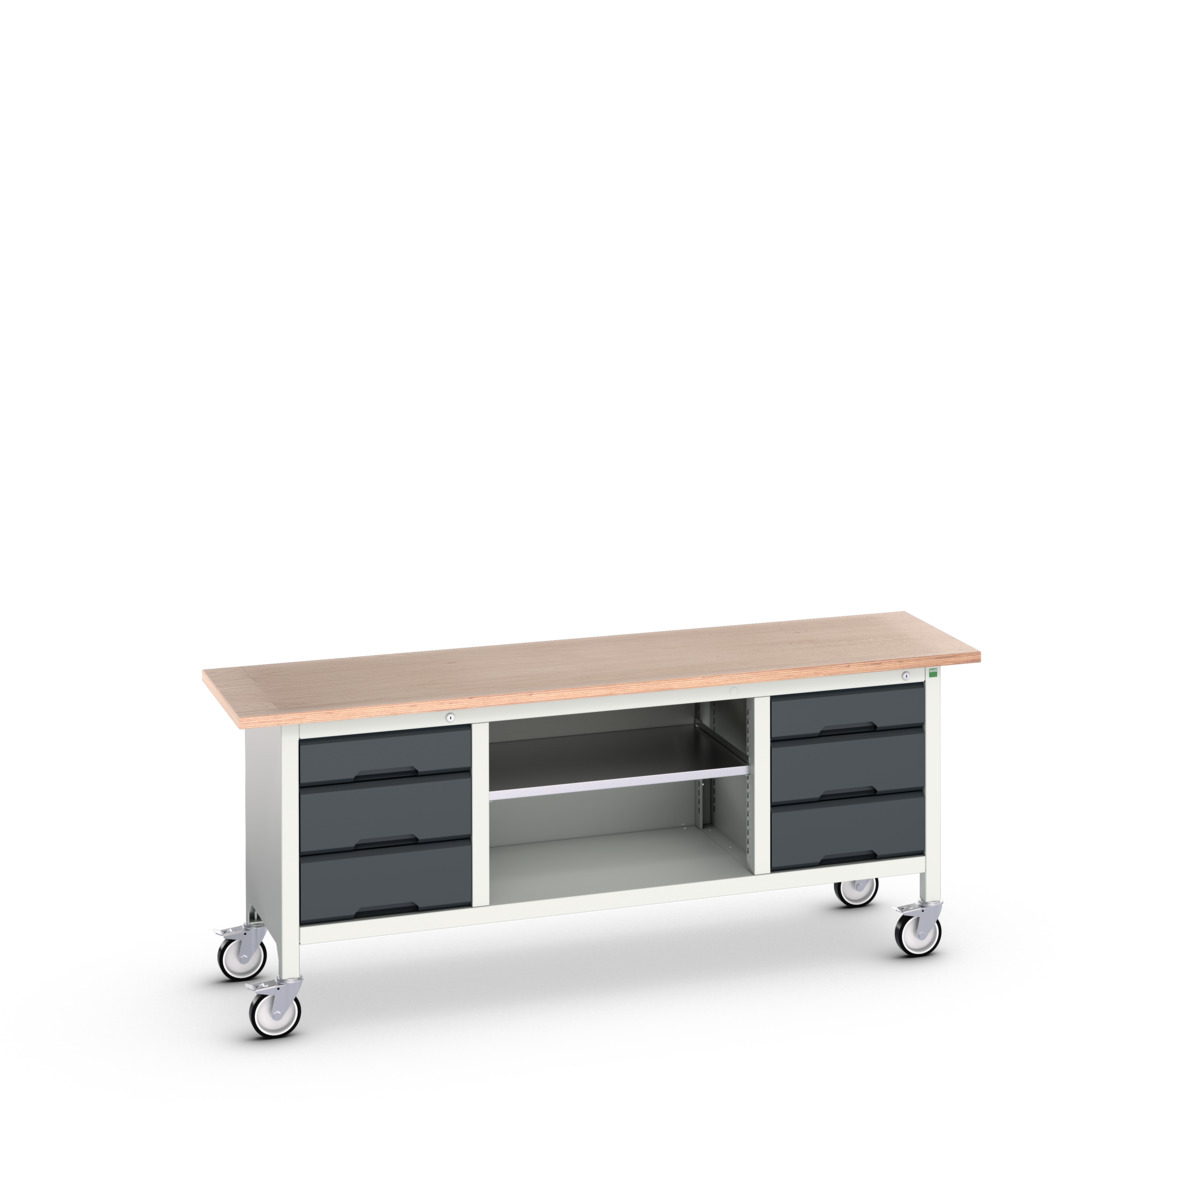 16923234.19 - verso mobile storage bench (mpx)